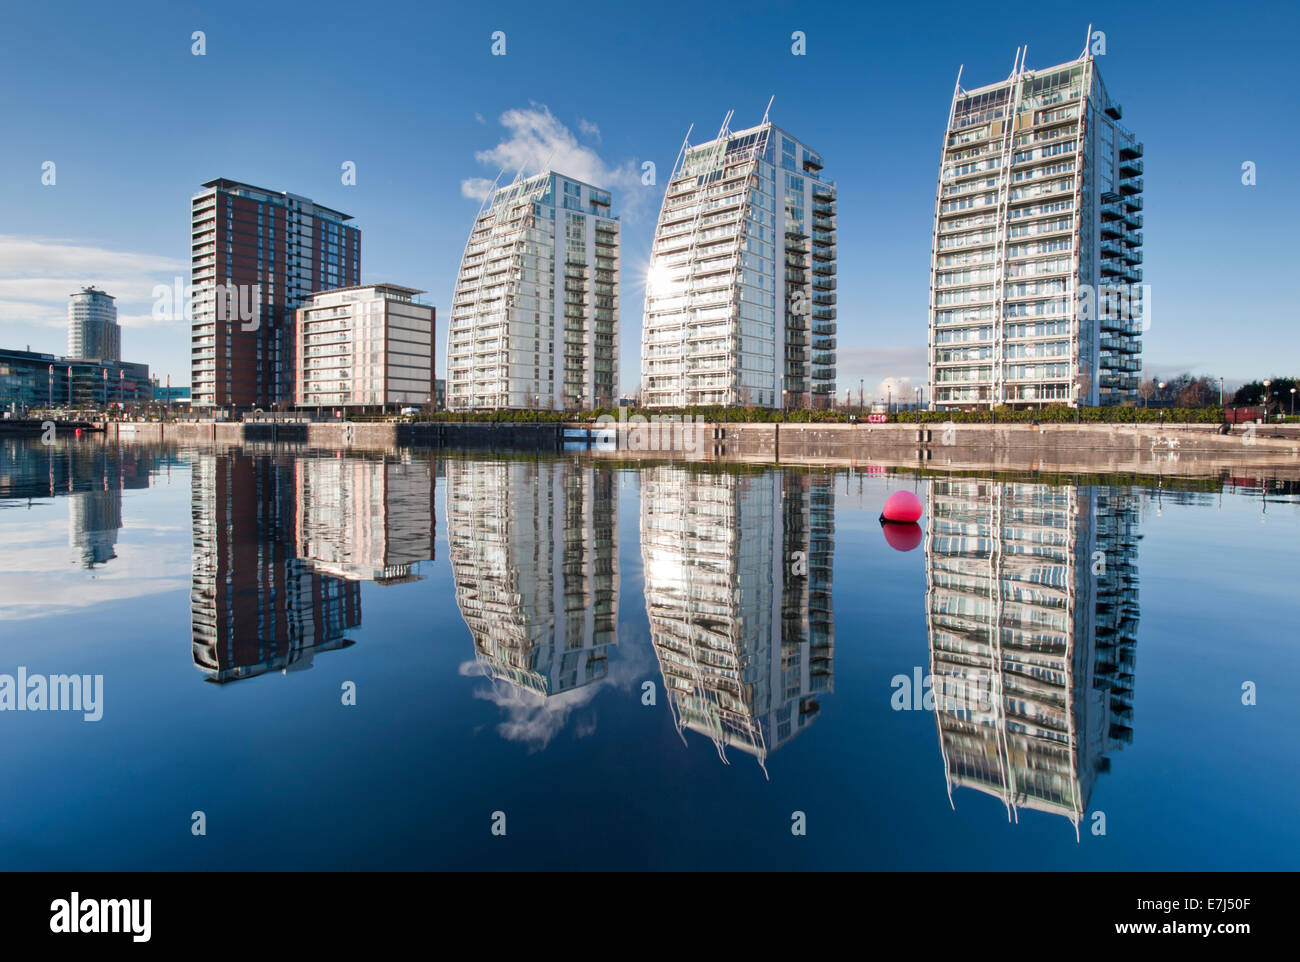 The NV Apartments Viewed Across Huron Basin, Salford Quays, Greater Manchester Stock Photo